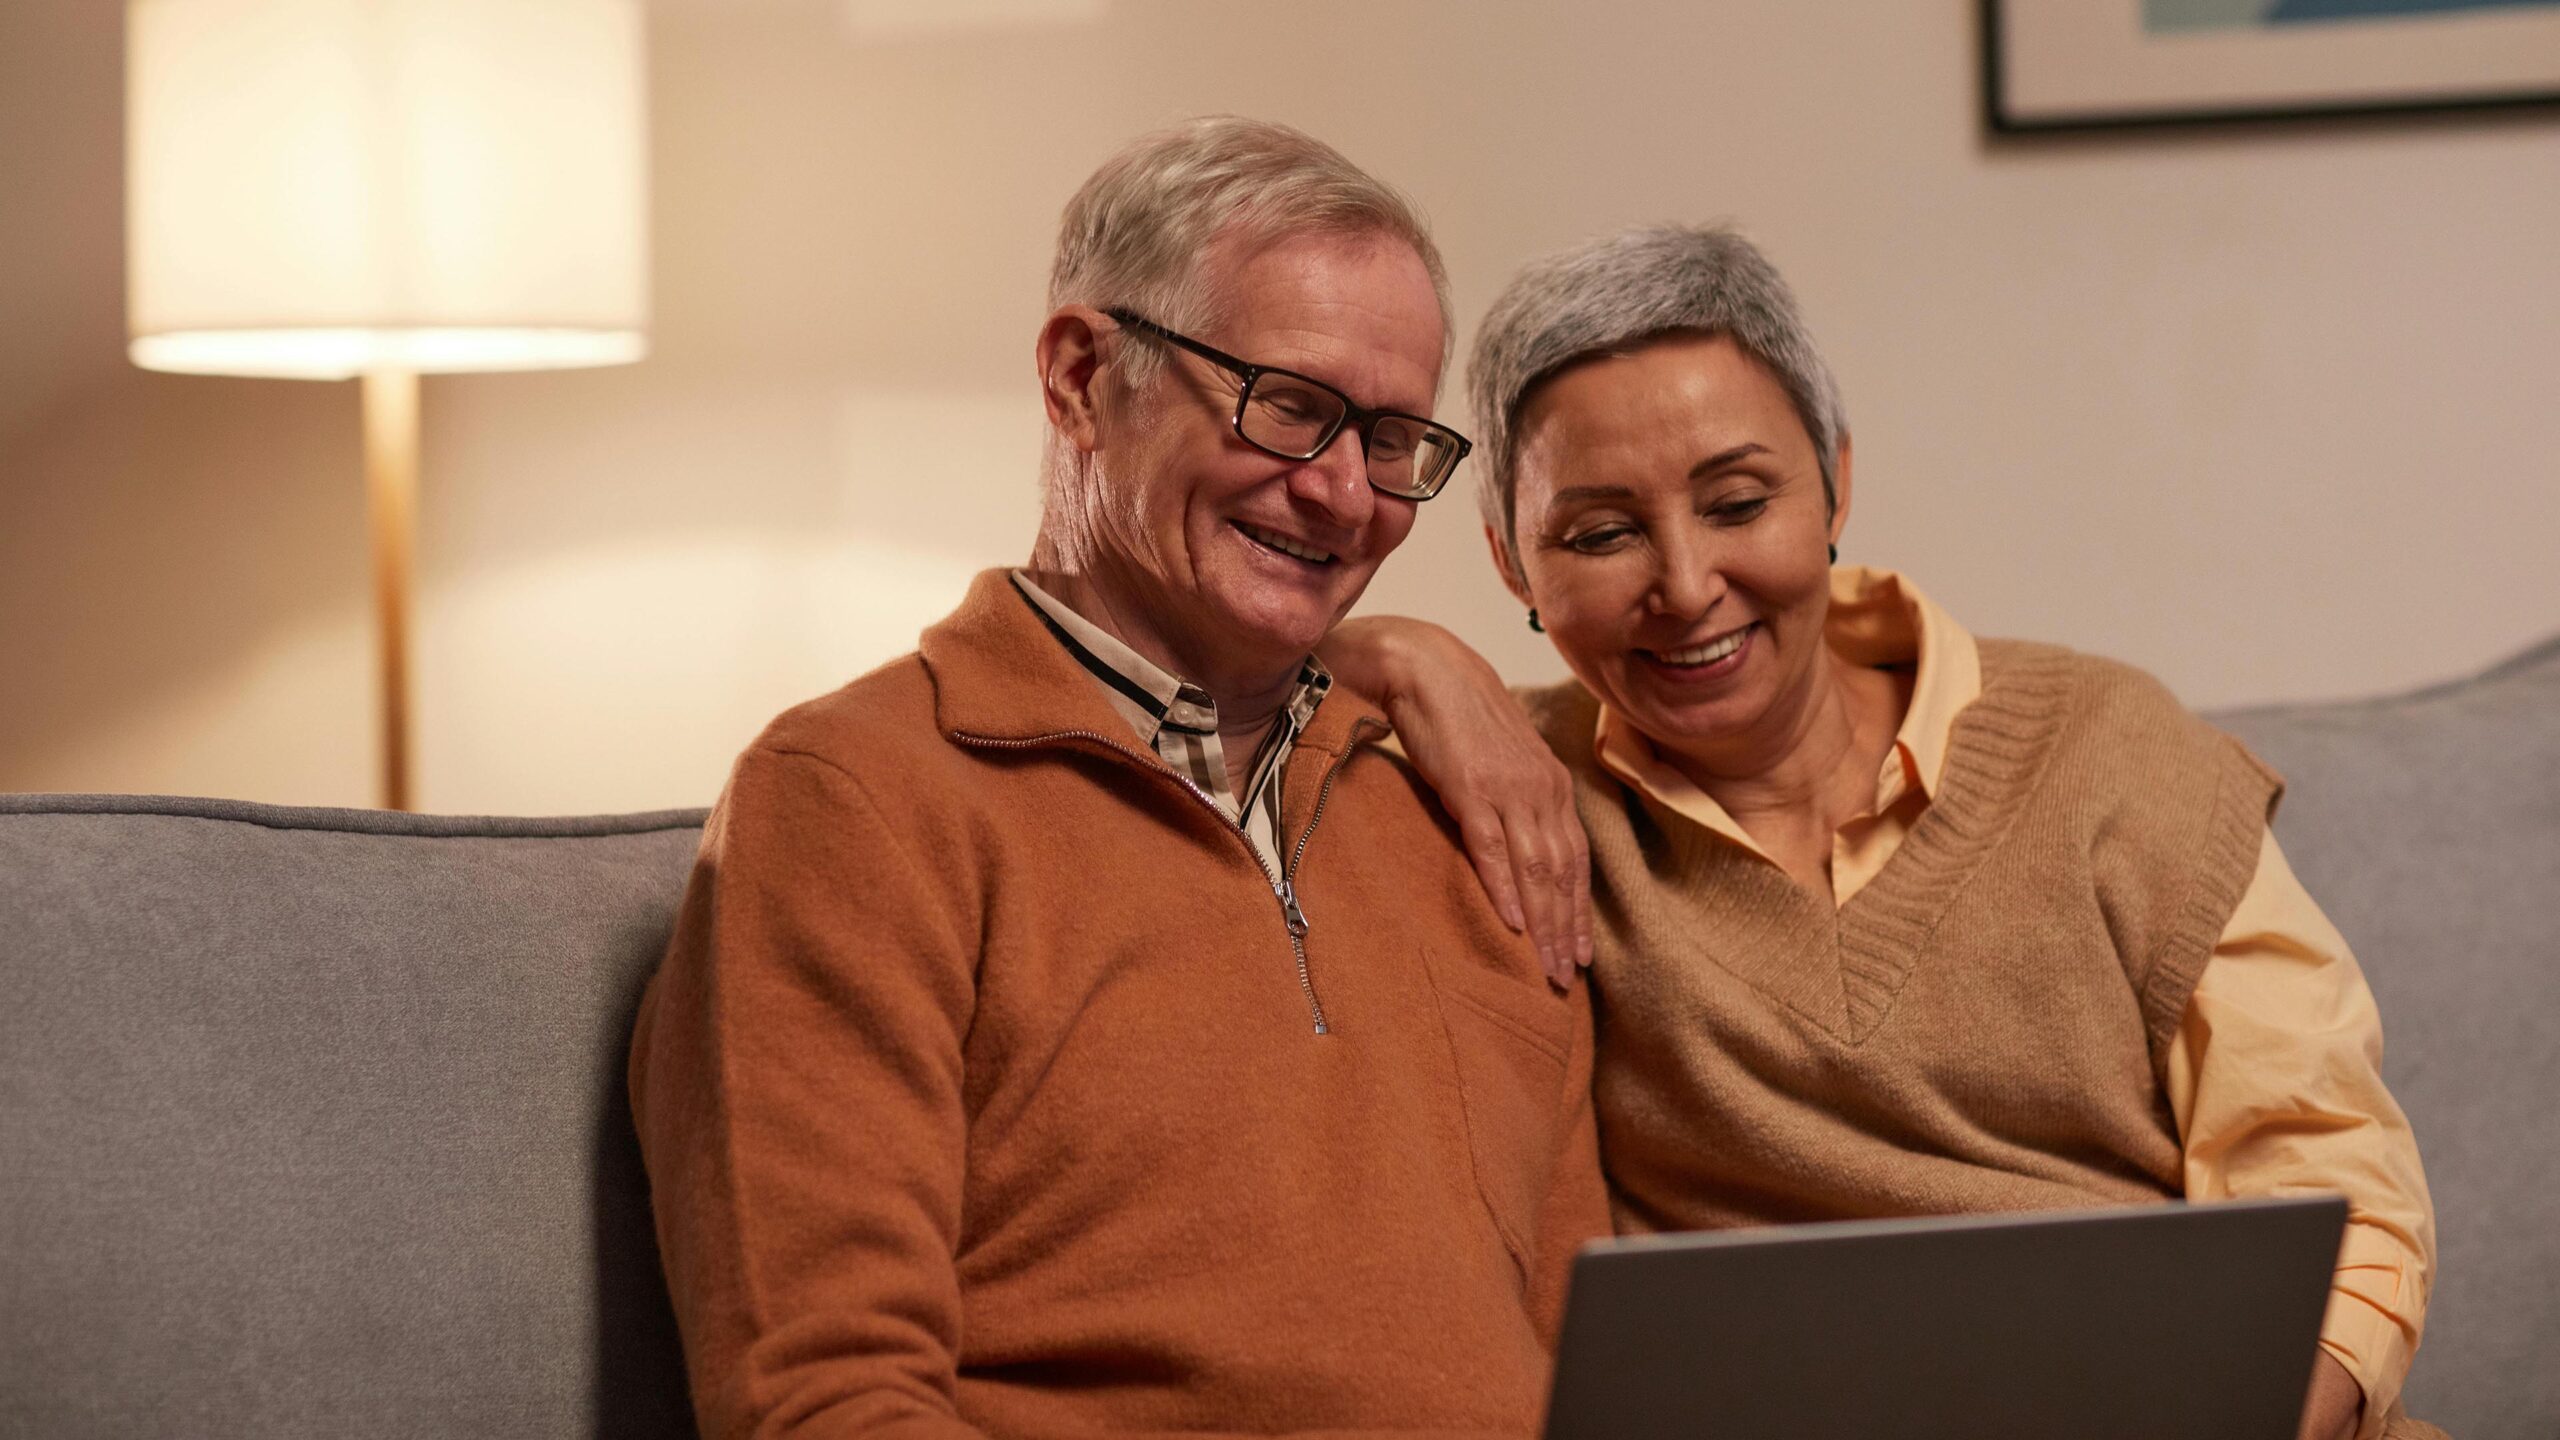 Senior couple sitting on couch and looking at laptop